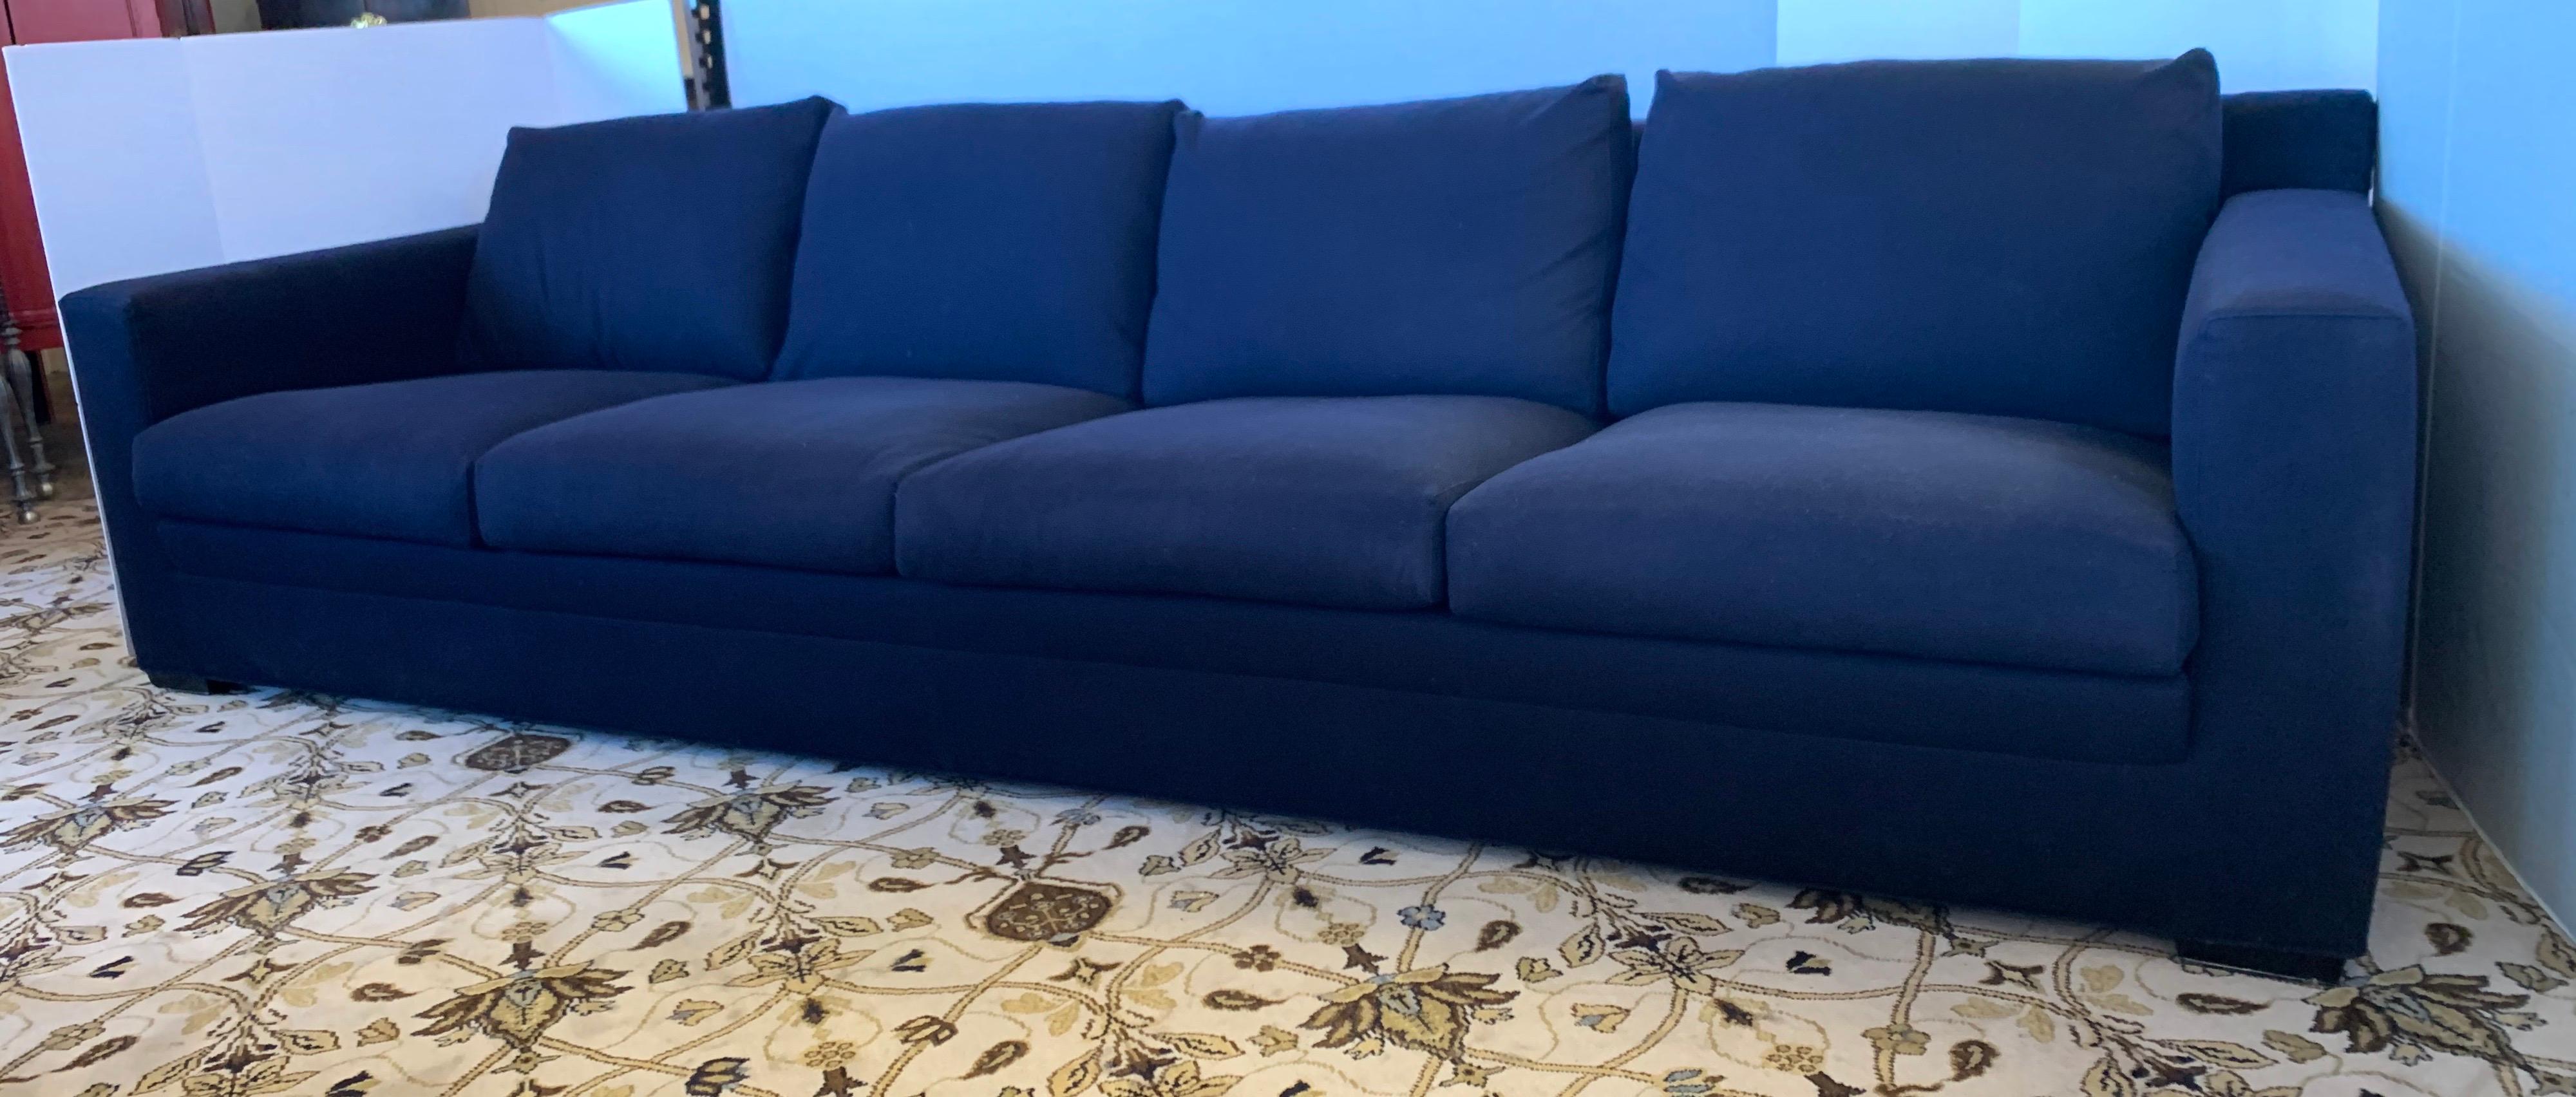 Mid-Century Modern Minotti Navy Blue Extra Long Sofa Made in Italy with Knoll Key West Pillows